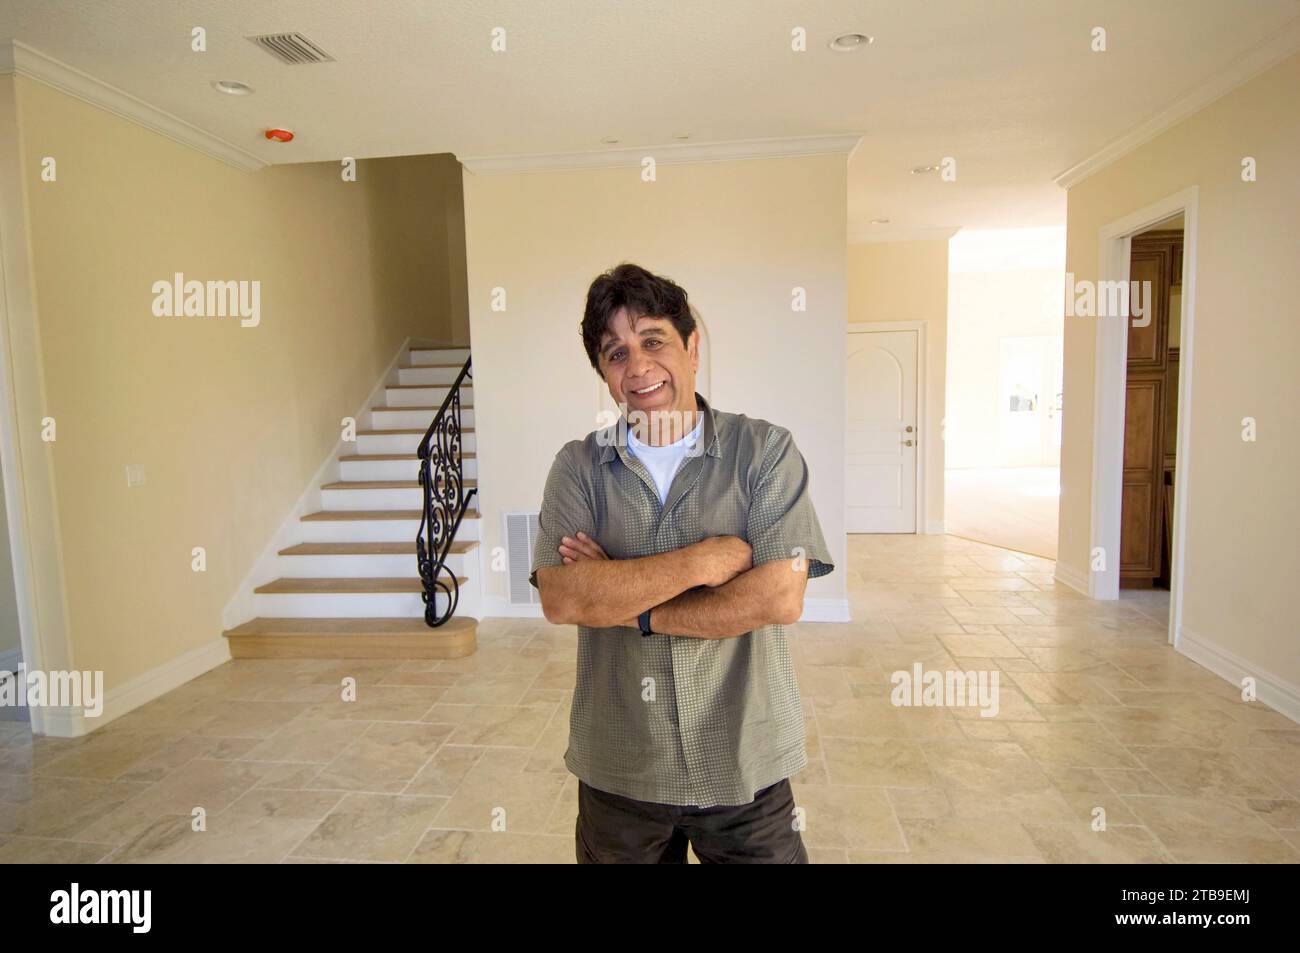 Man stands posing for the camera with arms crossed in a house with no furnishings; Tampa, Florida, United States of America Stock Photo